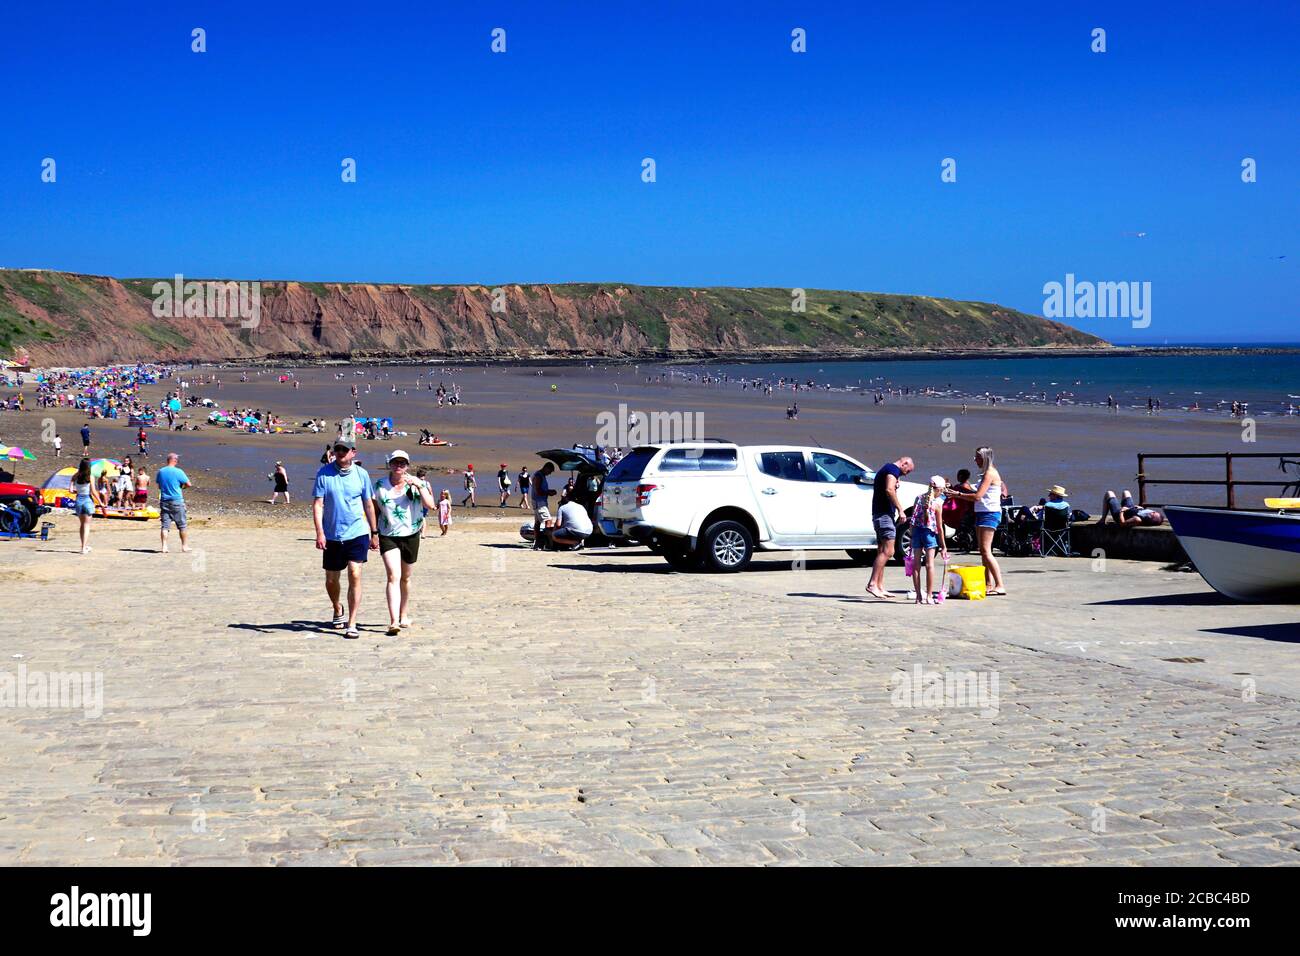 Filey, Yorkshire, UK.August 07, 2020. Holidaymakers enjoying freedom and sunshine after the Covid-19 lockdown with the Brigg in the background Stock Photo